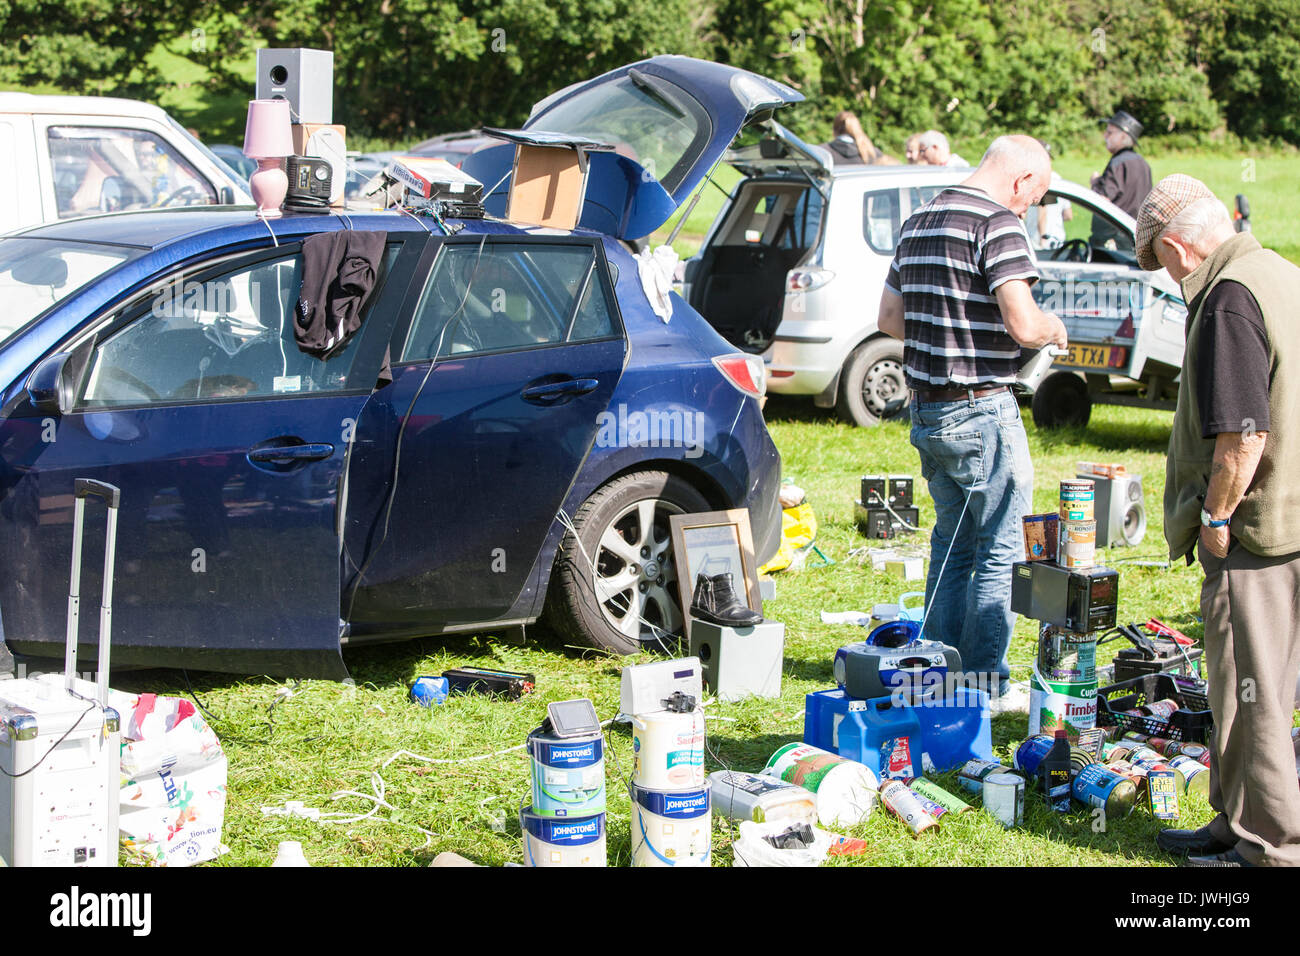 Tre'r-ddol village,Ceredigion, Wales, UK. 13th August, 2017. Sunday car boot sale.Popular with tourists to the coastal area and locals. Held in the village of Tre'r-ddol,between Machynlleth and Aberystwyth,Ceredigion,Mid,Wales,U.K.,Europe. Credit: Paul Quayle/Alamy Live News Stock Photo